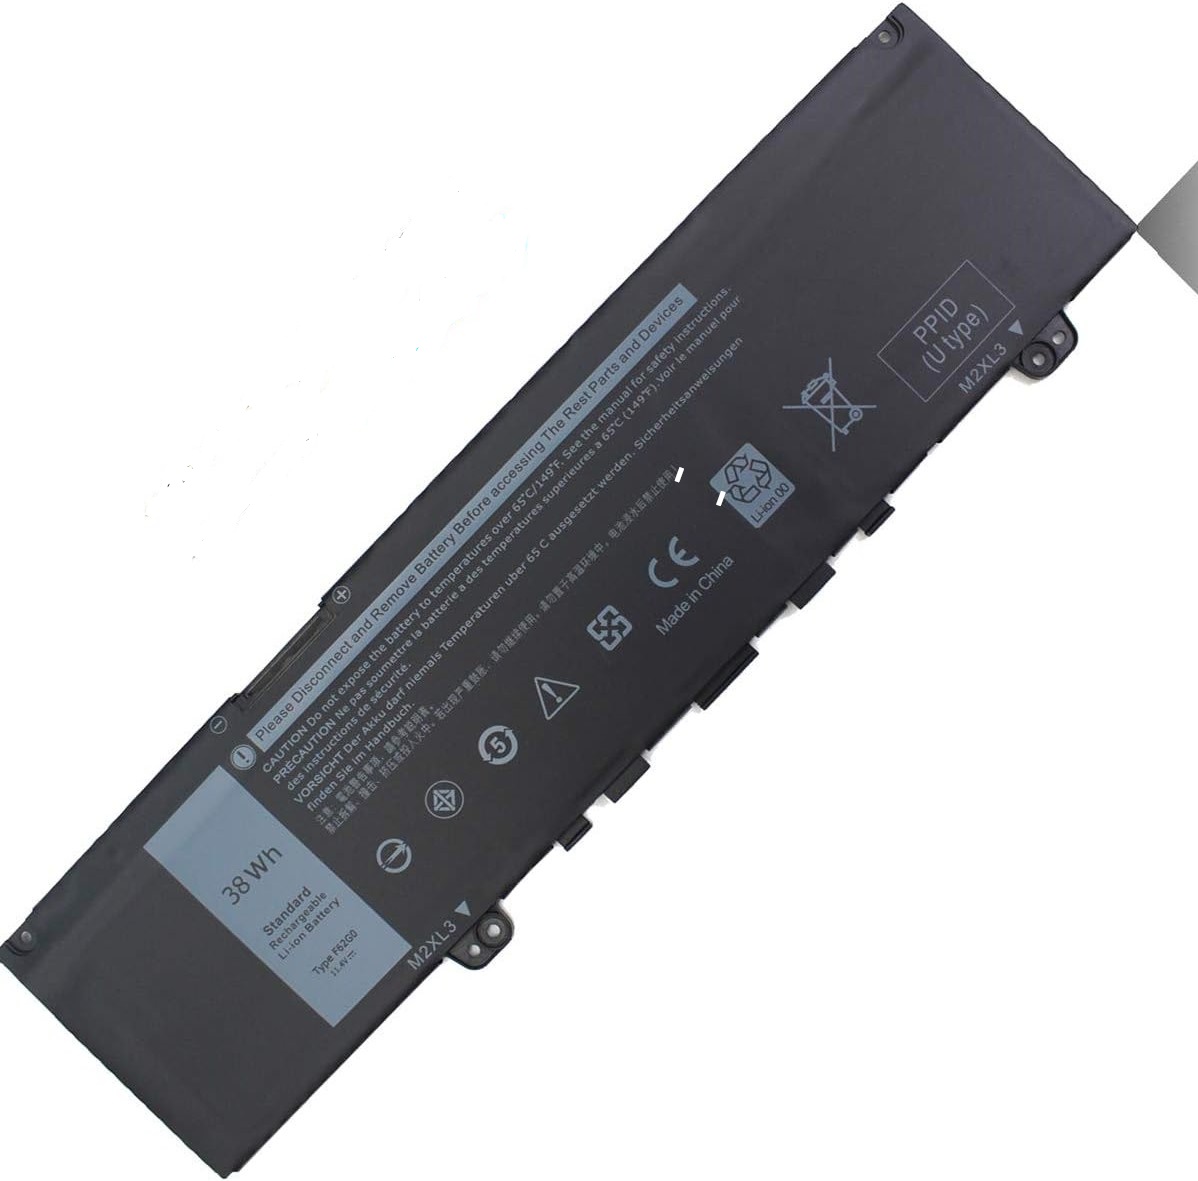 WISTAR F62G0 39DY5 Dell OEM Original battery for Inspiron 13 7370 7373 7386 5370 Vostro 5370 38Wh